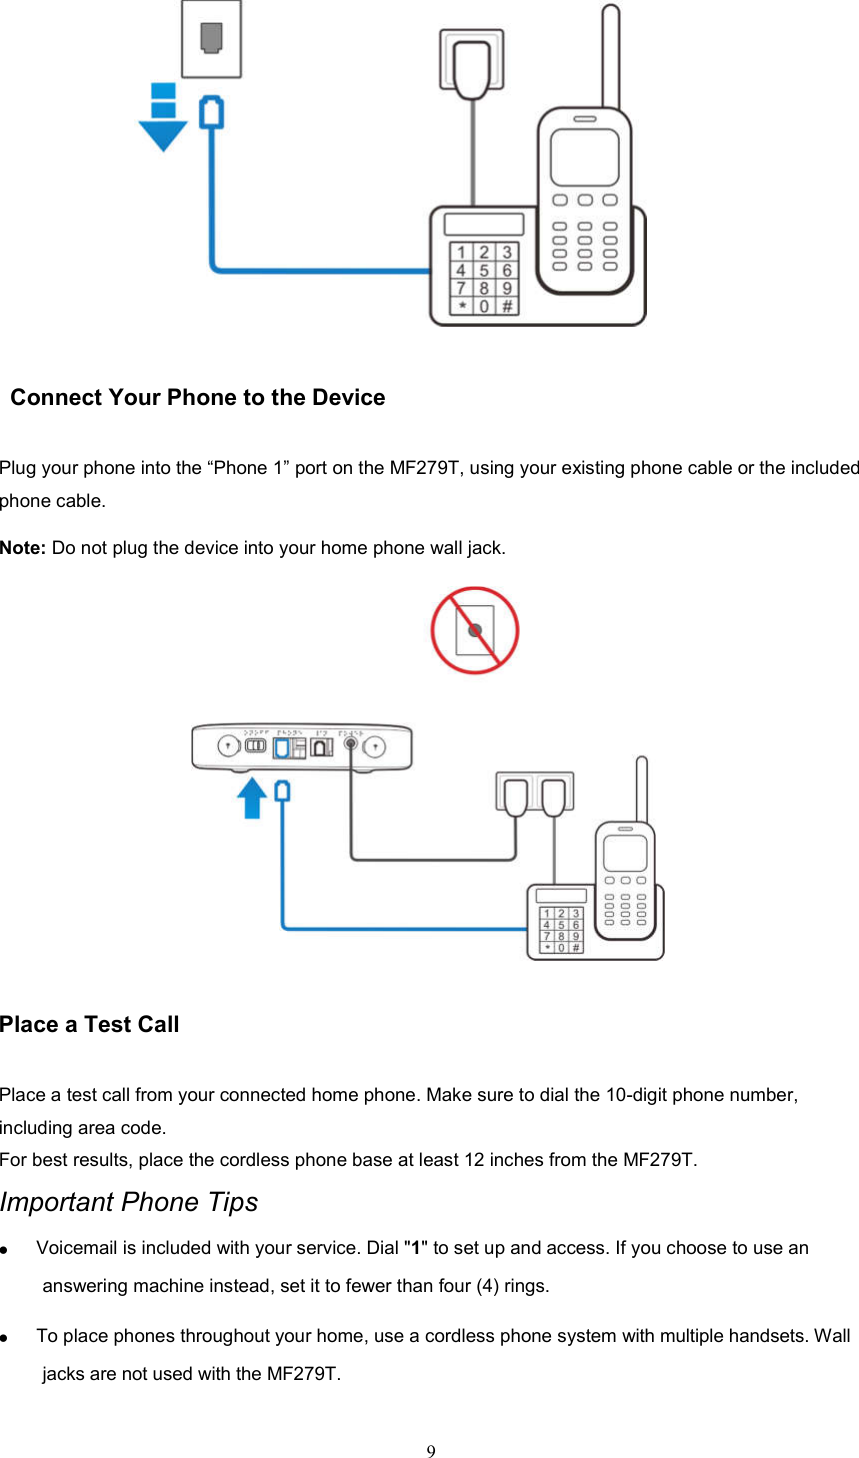 9           Connect Your Phone to the Device Plug your phone into the “Phone 1” port on the MF279T, using your existing phone cable or the included phone cable. Note: Do not plug the device into your home phone wall jack.              Place a Test Call   Place a test call from your connected home phone. Make sure to dial the 10-digit phone number, including area code. For best results, place the cordless phone base at least 12 inches from the MF279T. Important Phone Tips  Voicemail is included with your service. Dial &quot;1&quot; to set up and access. If you choose to use an answering machine instead, set it to fewer than four (4) rings.    To place phones throughout your home, use a cordless phone system with multiple handsets. Wall jacks are not used with the MF279T.  